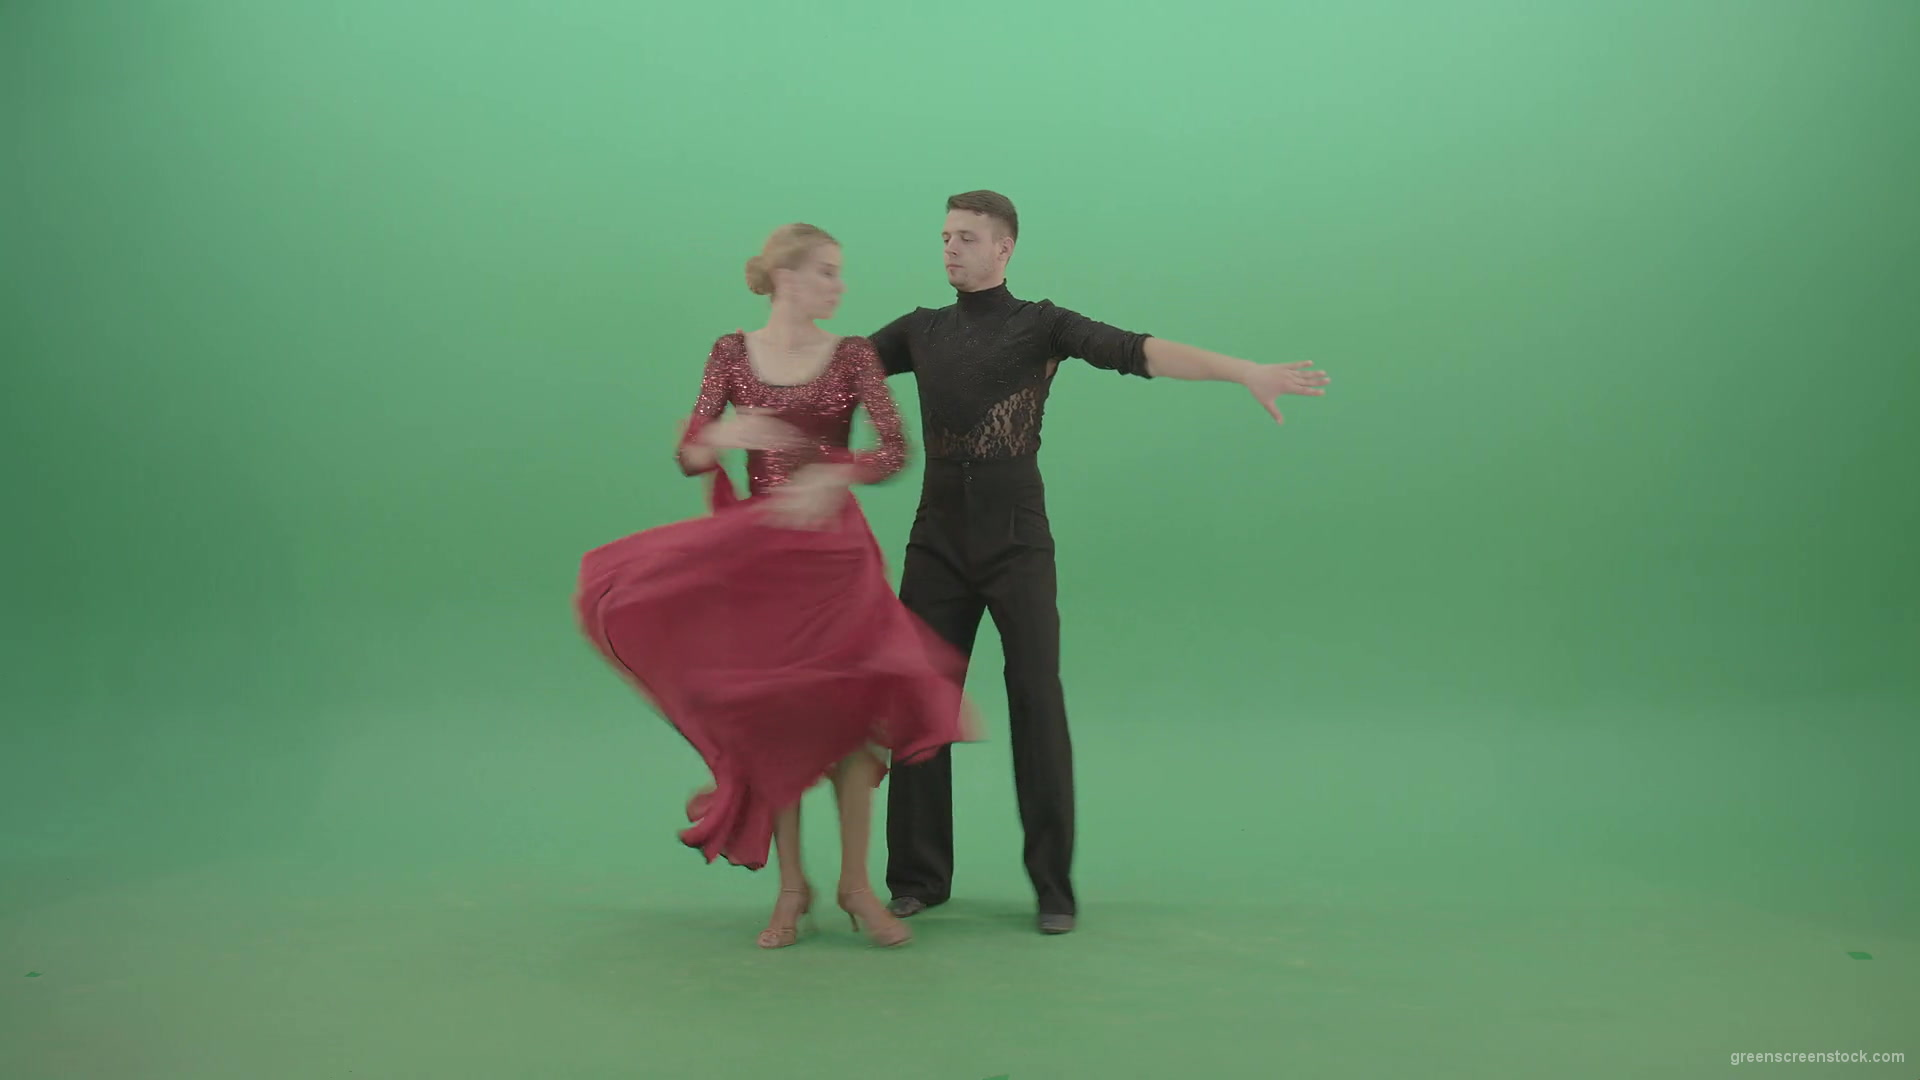 Passion-latino-ballroom-dance-by-lovely-couple-man-and-girl-isolated-on-green-screen-4K-Video-Footage-1920_002 Green Screen Stock